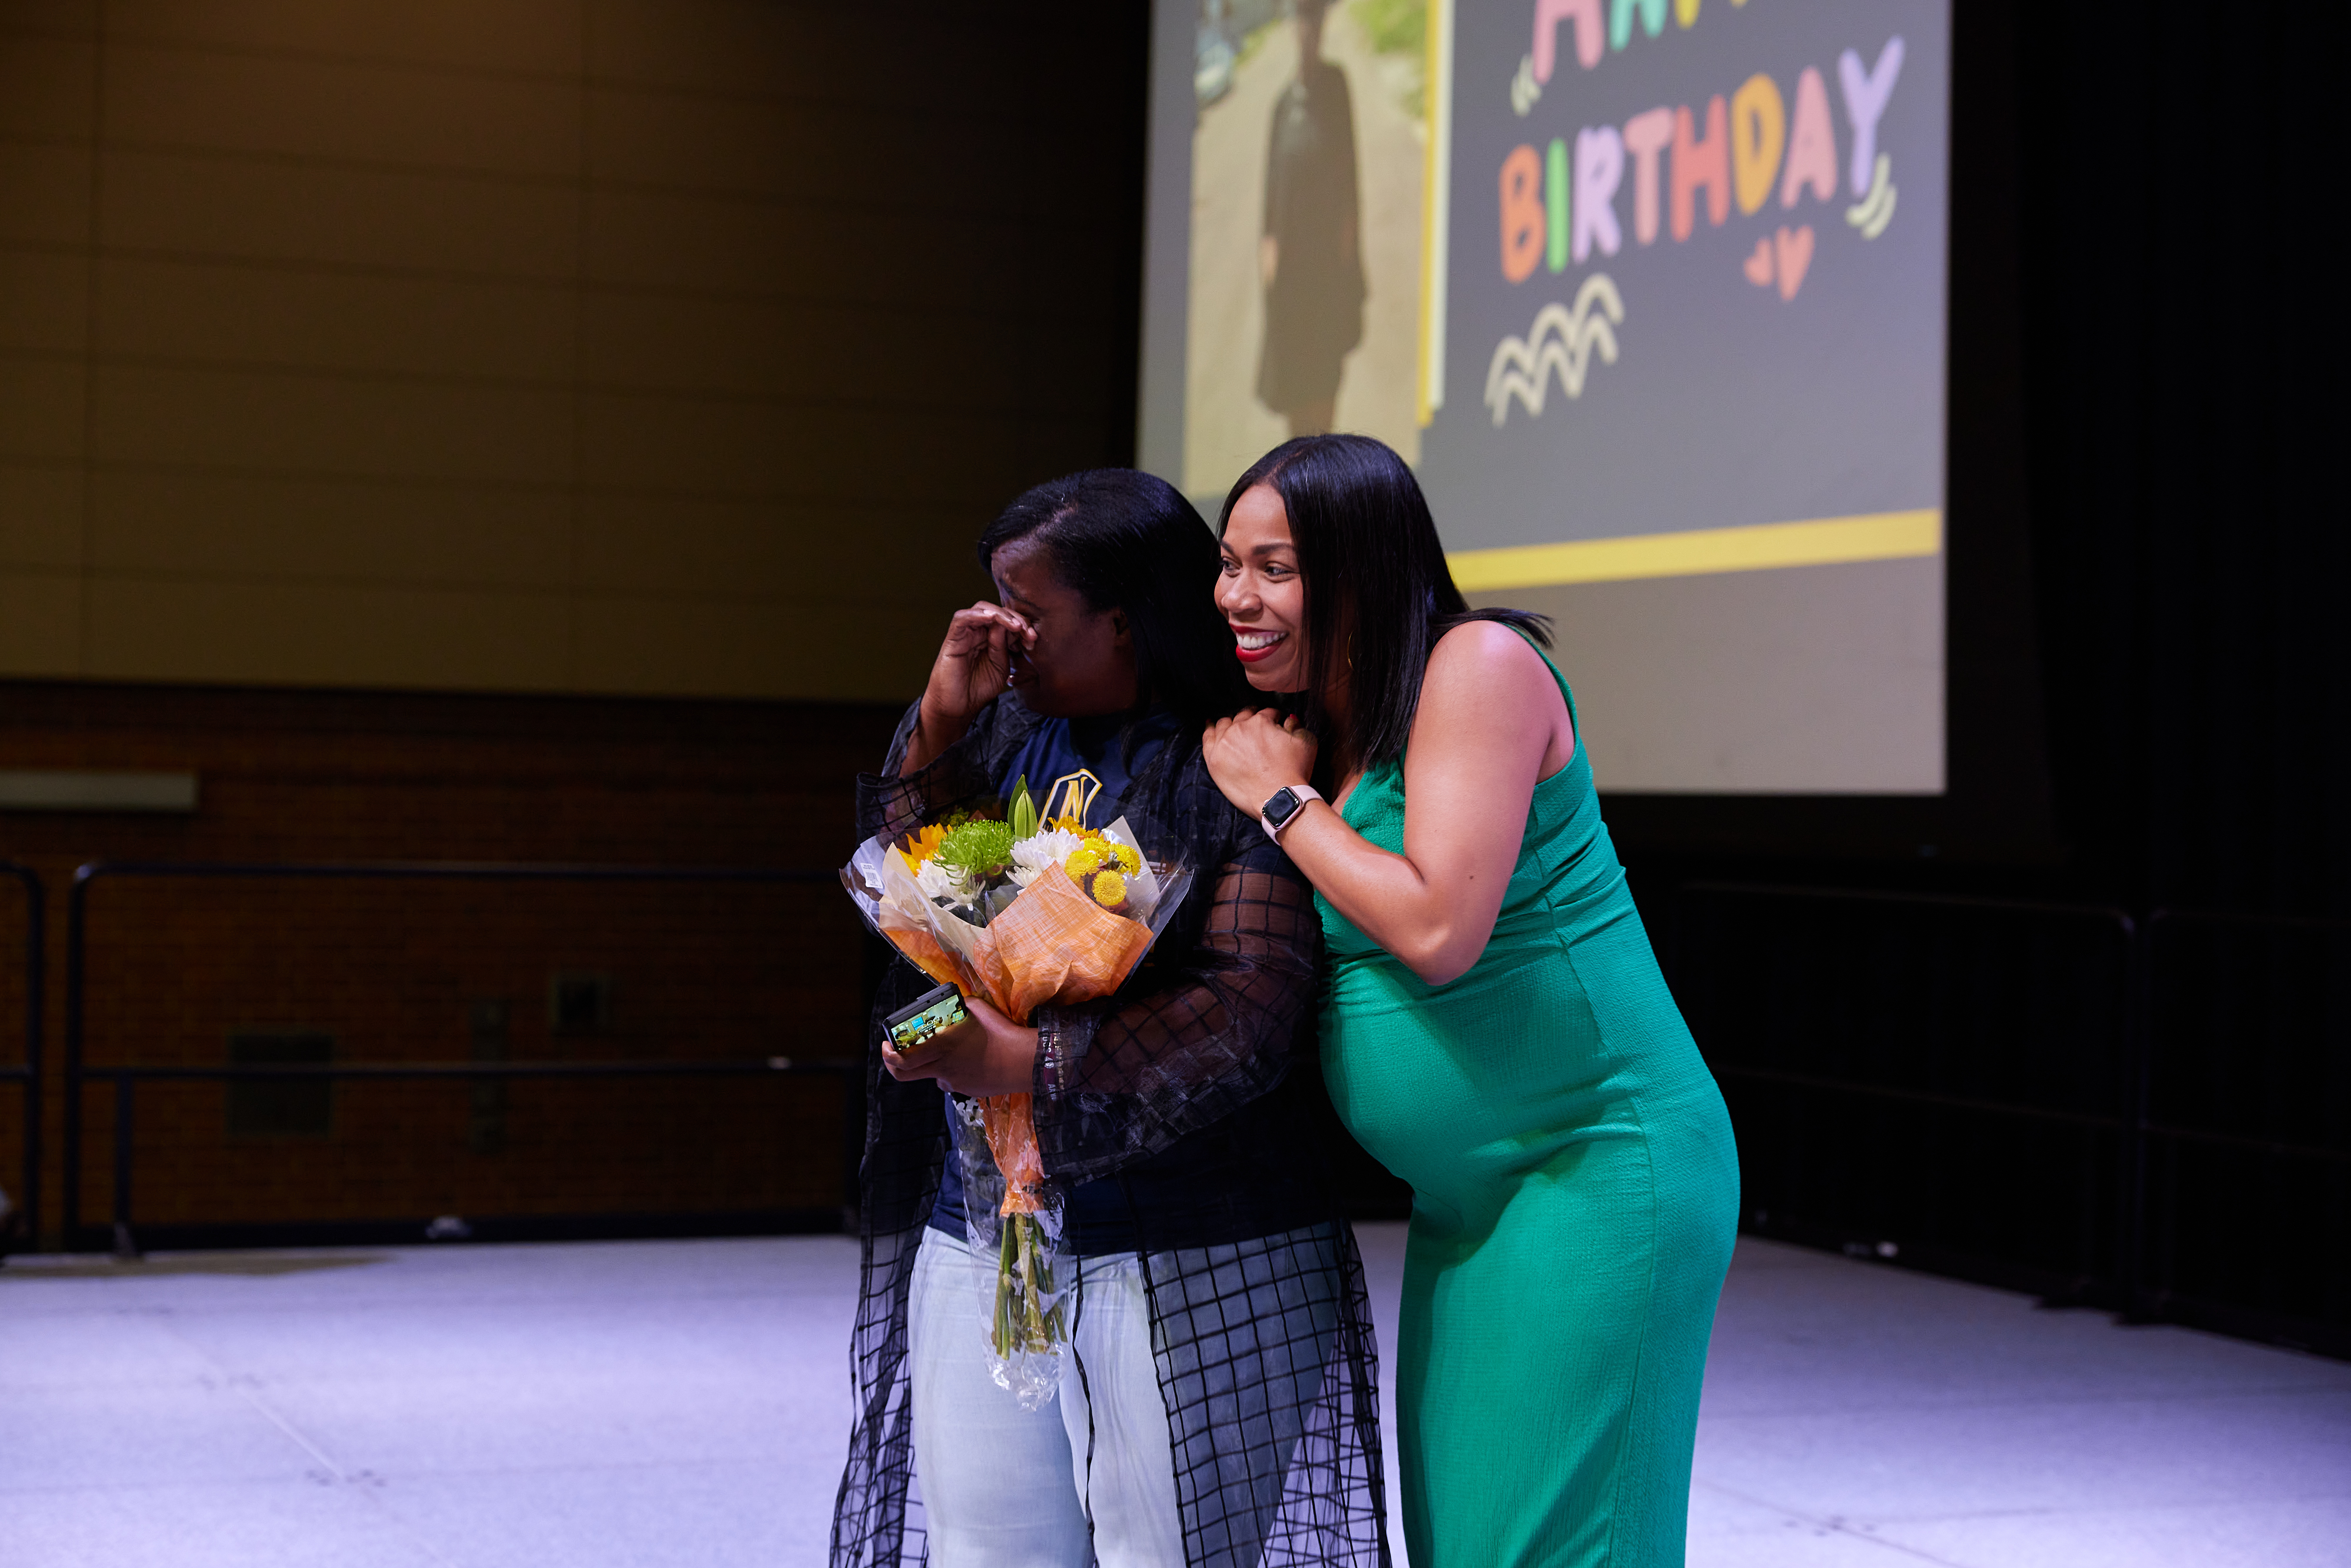 In this photo, Noble Schools' parent Myisha Shields is on stage, side hugging Jennifer Reid Davis, Noble's Head of Strategy and Equity. Ms Shields is holding a bouquet of flowers and crying. Behind both of them is a projector screen that has a photo of Ms Shield's on it and the words "Happy Birthday".